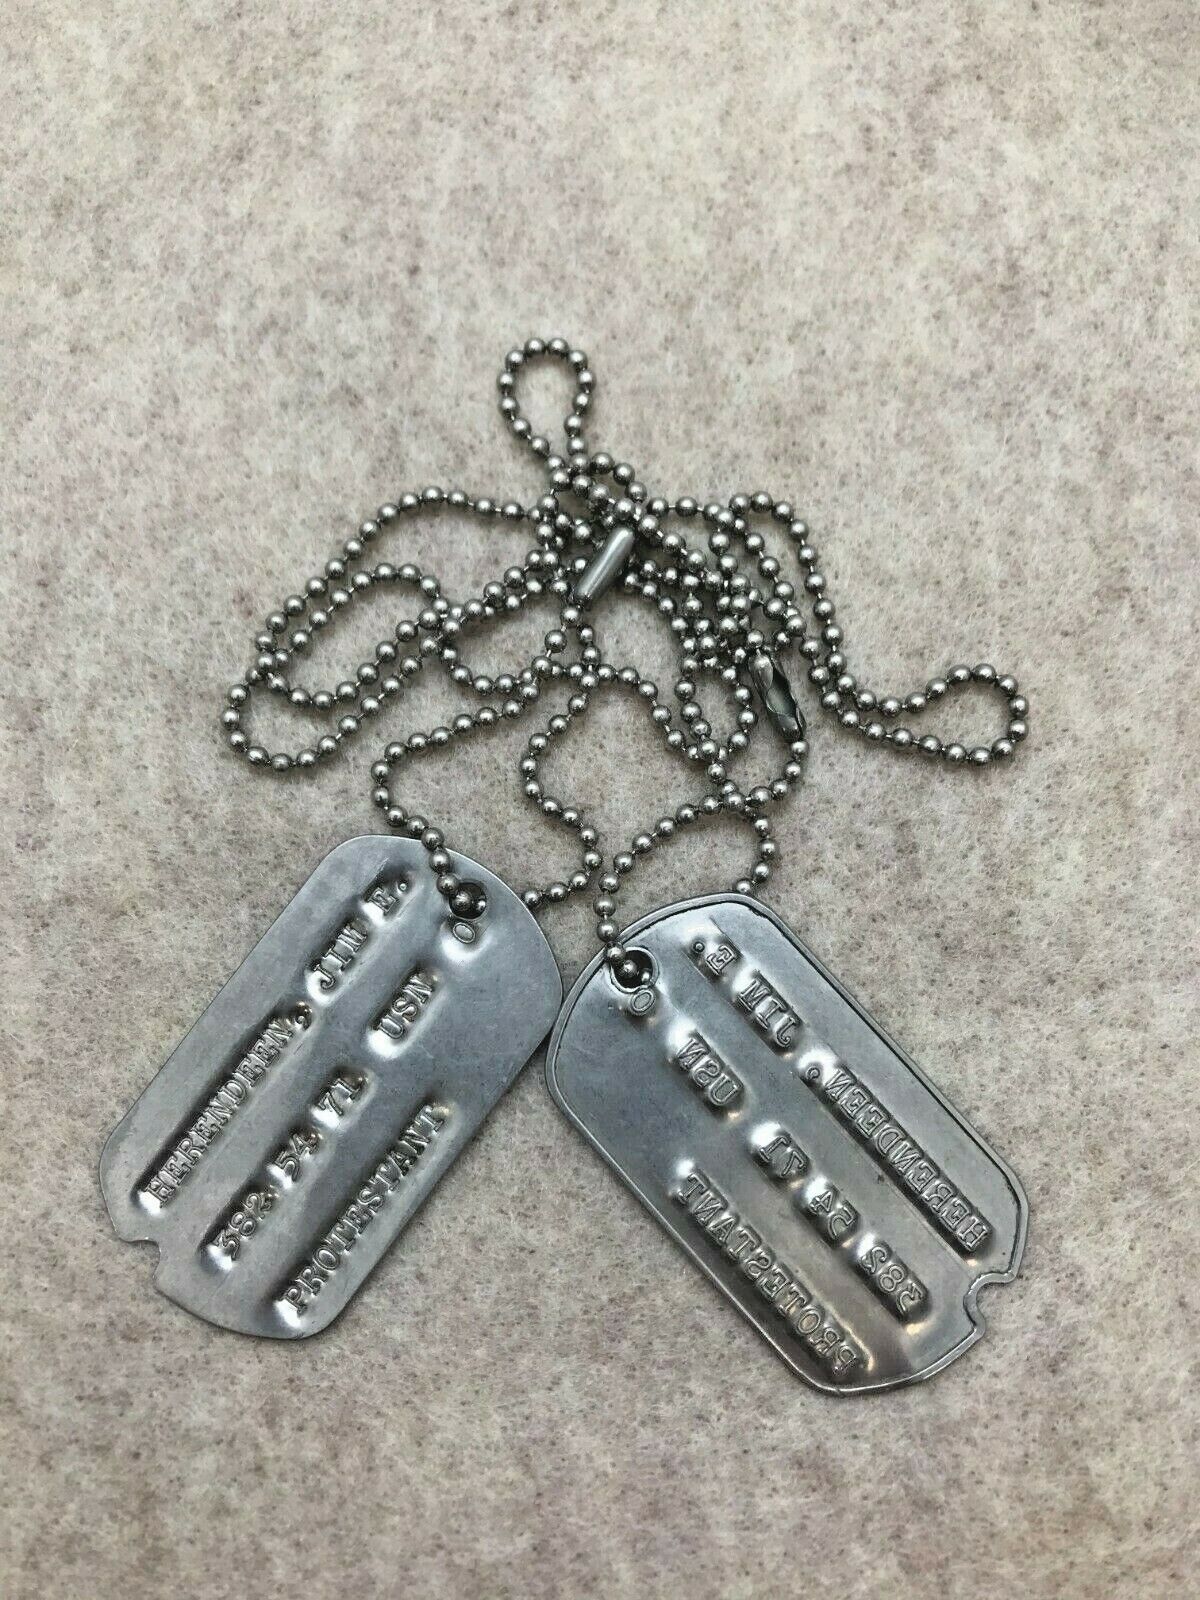 RARE KOREAN WAR SOLDIER DOG TAGS / TAGS - ID TO SOLDIER HERENDEEN (PROTESTANT) 